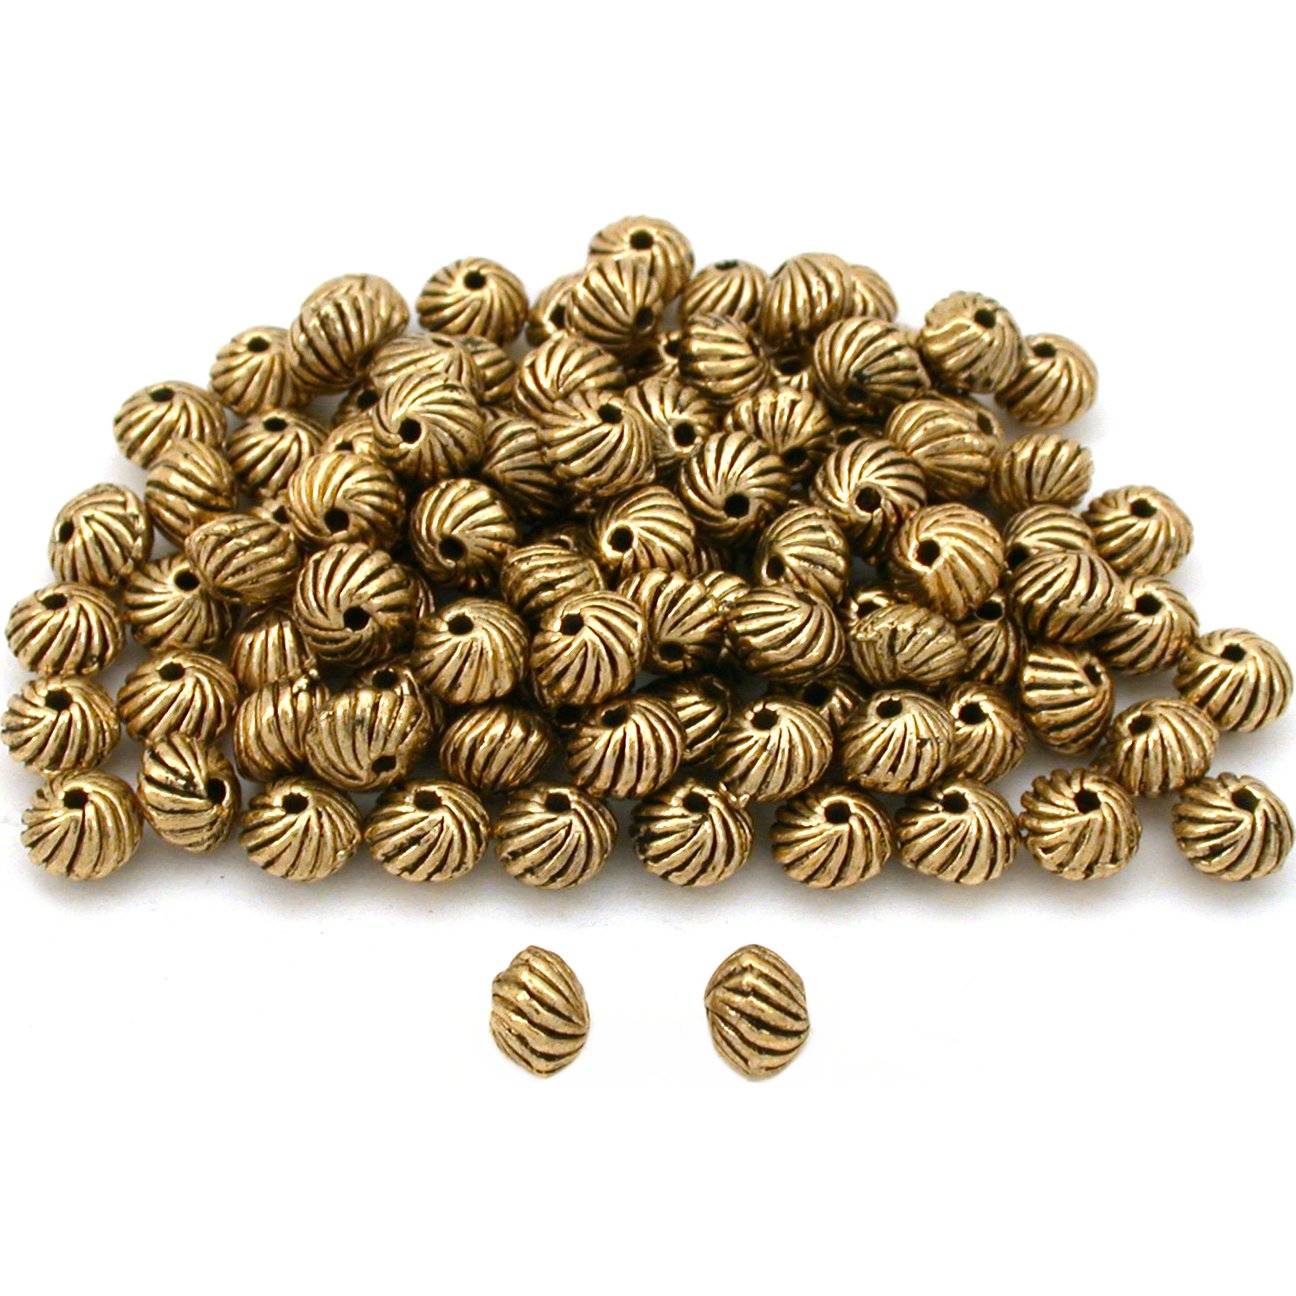 Saucer Bali Beads Antique Gold Plated 6.5mm Approx 100